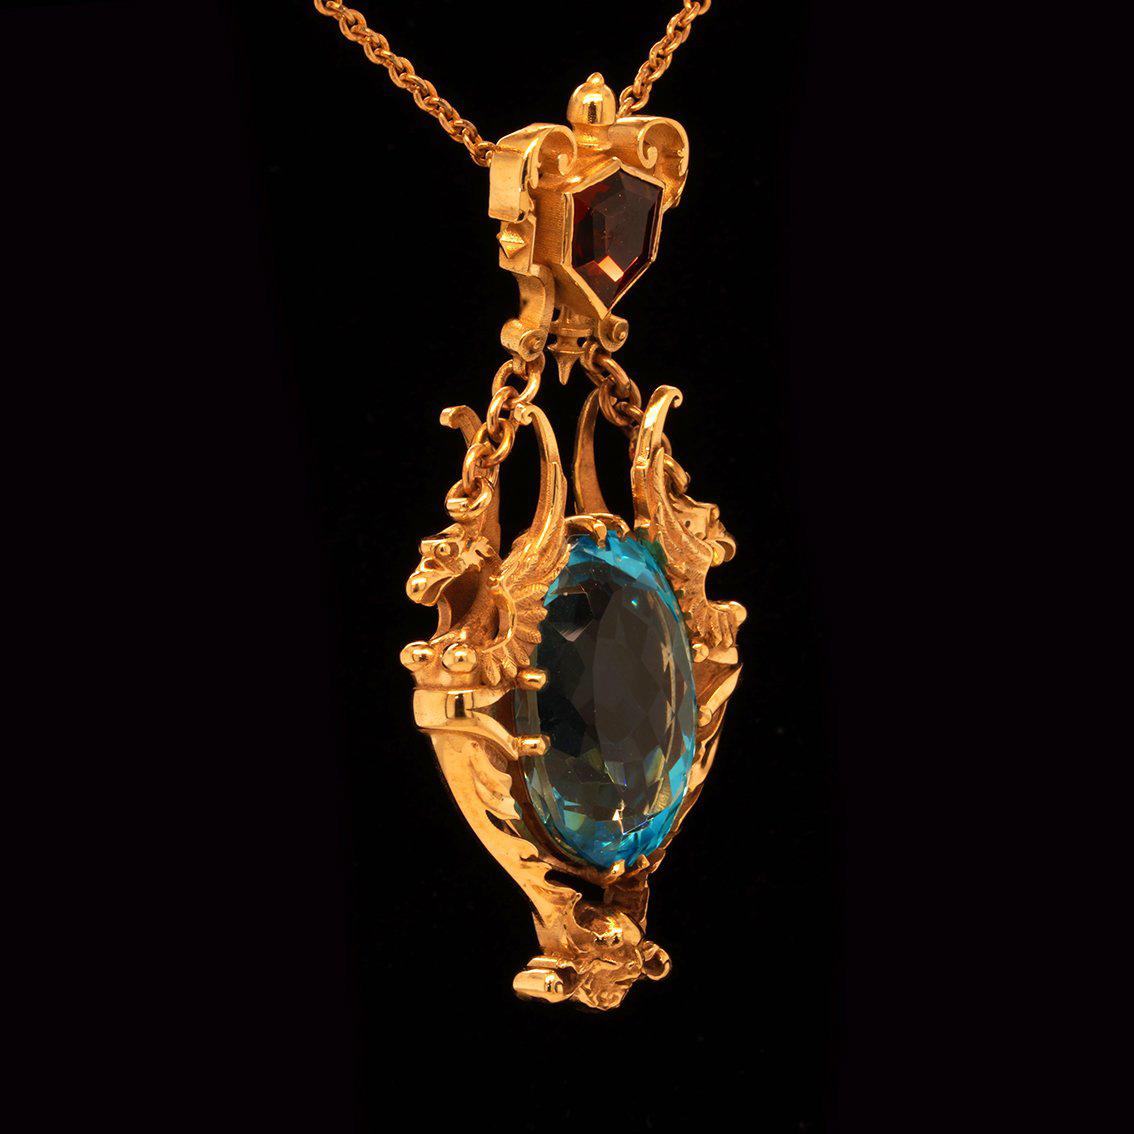 28ct Oval Swiss Blue Topaz, Garnet 9k Yellow Gold Antique Style Pendant Necklace For Sale 11